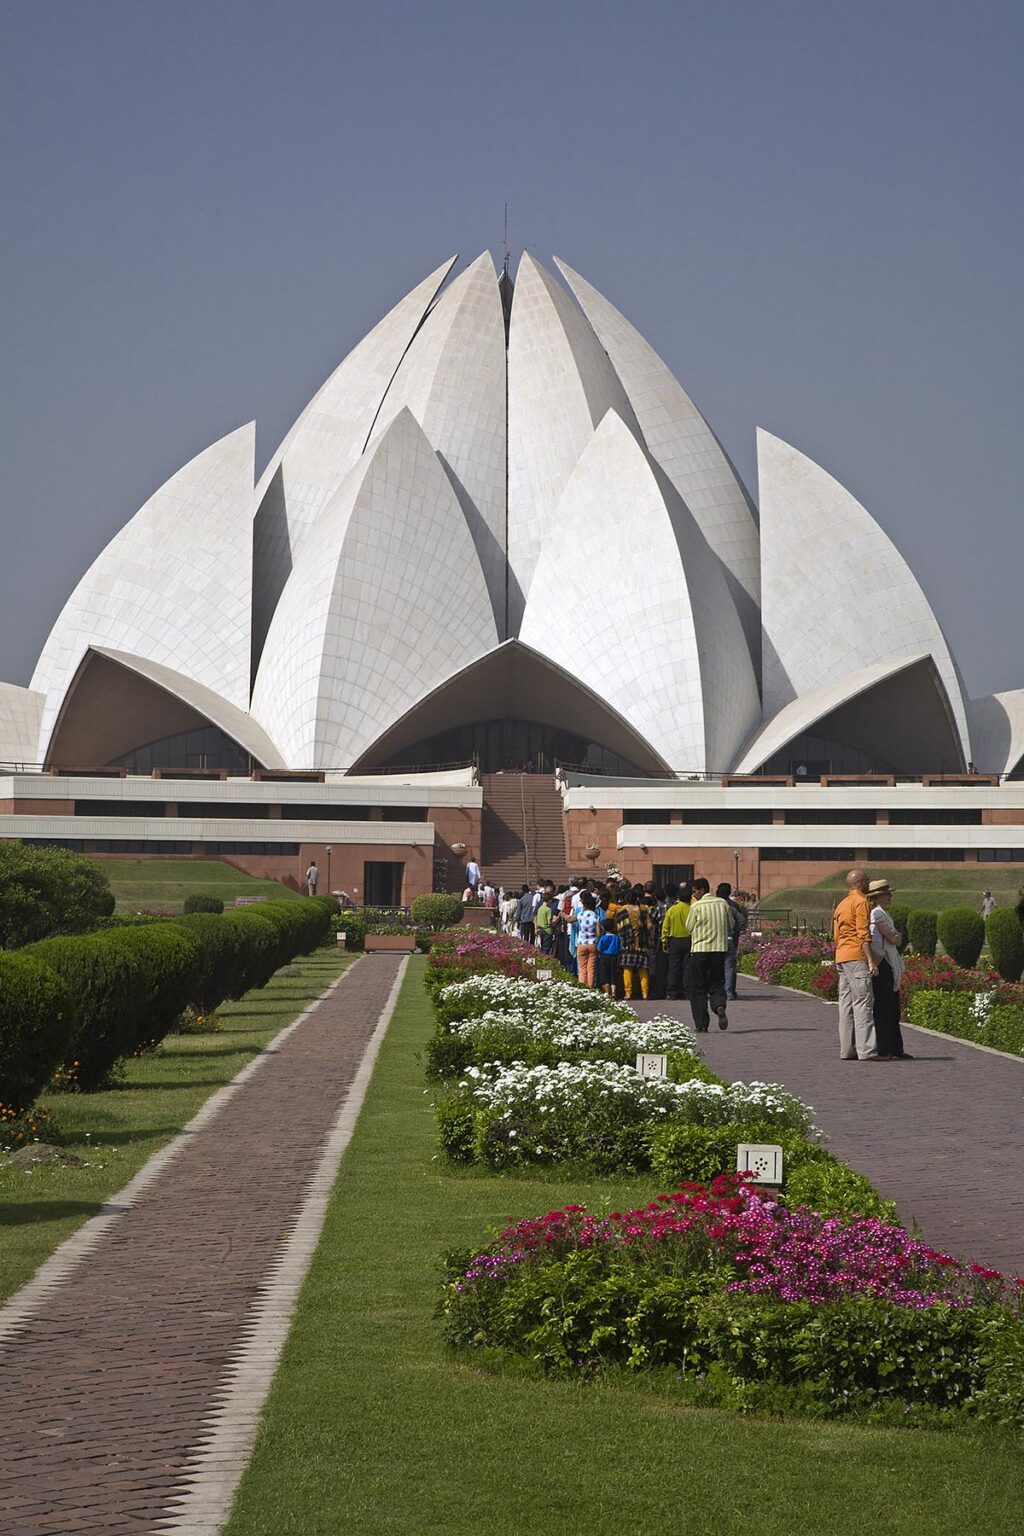 THE BAHAI HOUSE OF WORSHIP known as the LOTUS TEMPLE was completed in 1986 -  NEW DELHI, INDIA